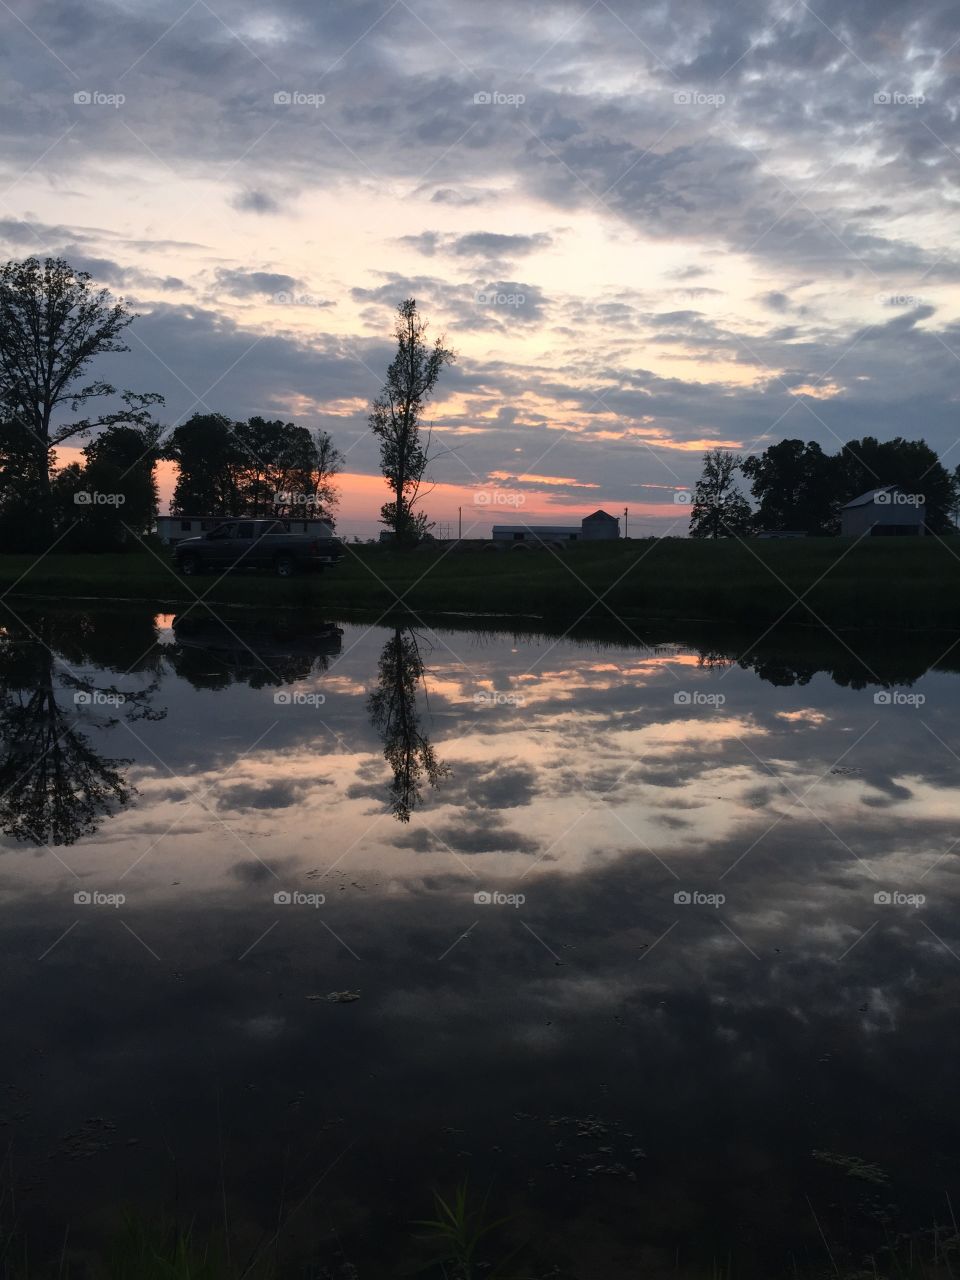 Country. Reflections 